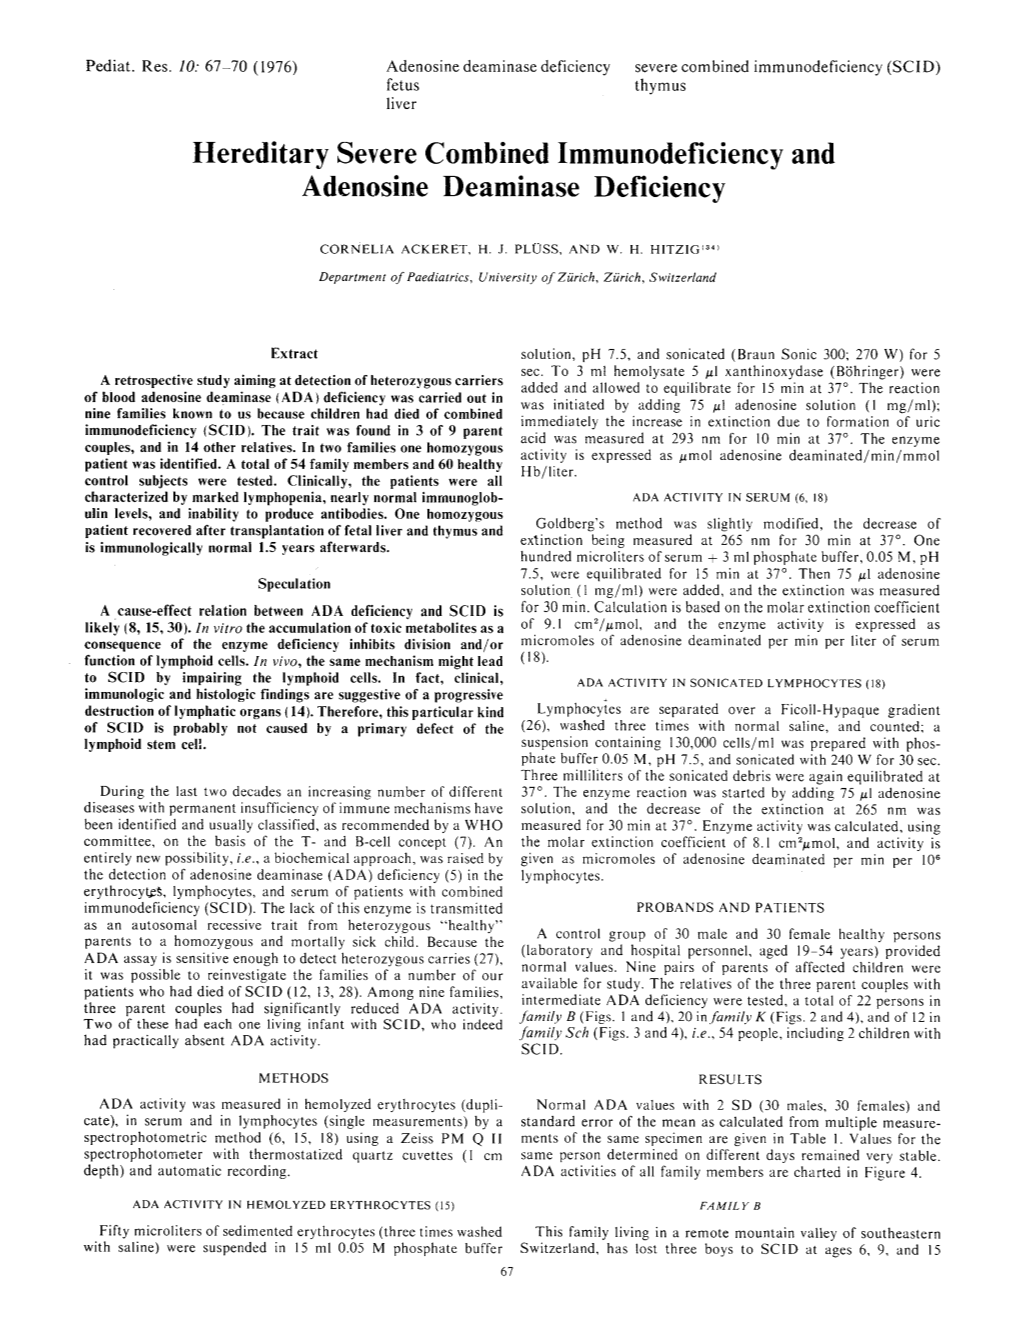 Hereditary Severe Combined Immunodeficiency and Adenosine Deaminase Deficiency